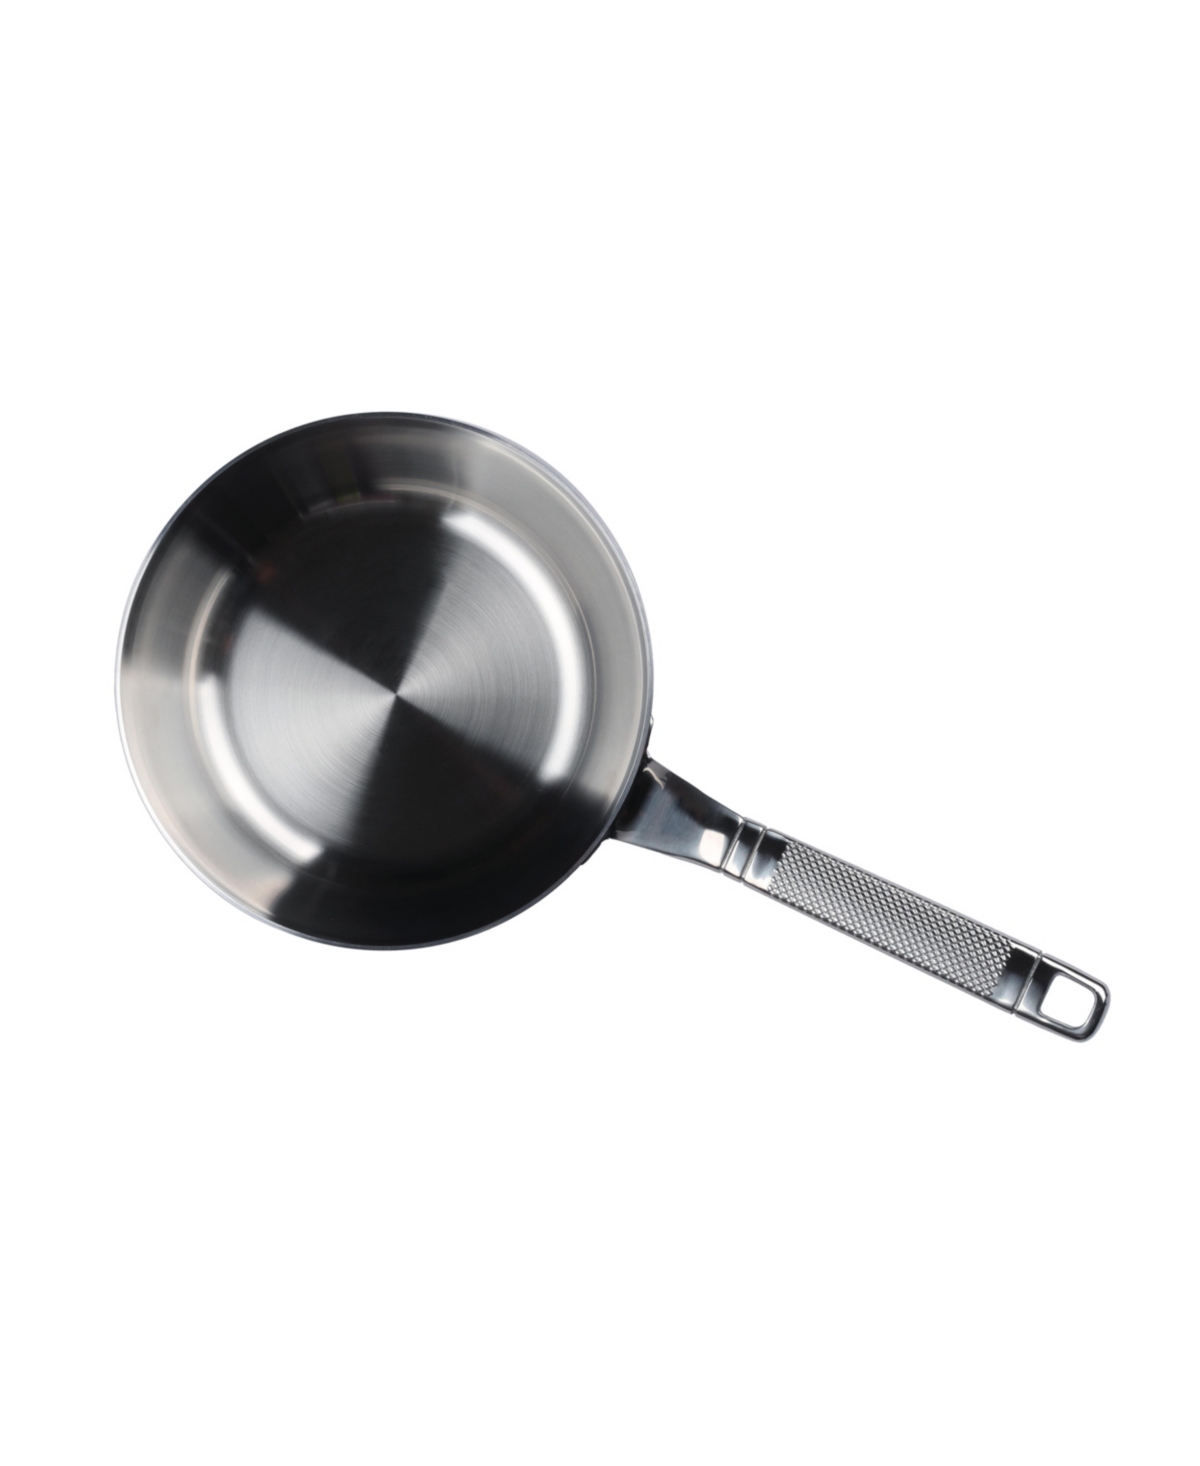 Shop Saveur Selects Voyage Series Tri-ply Stainless Steel 8" Fry Pan In Silver